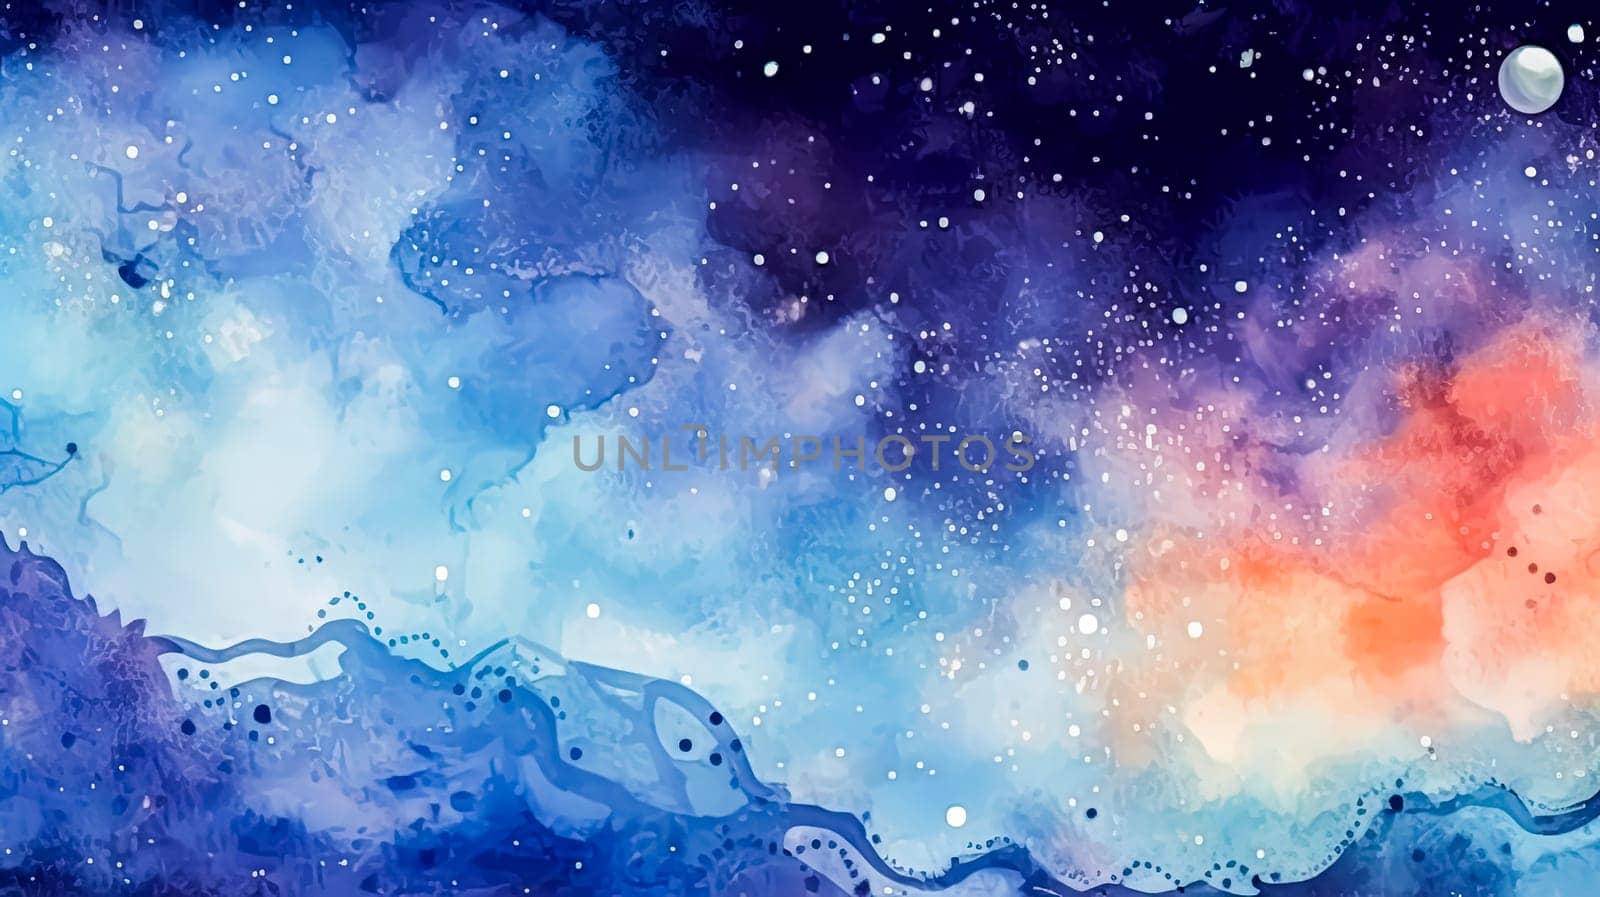 Watercolor magic unfolds in a starry sky by Alla_Morozova93